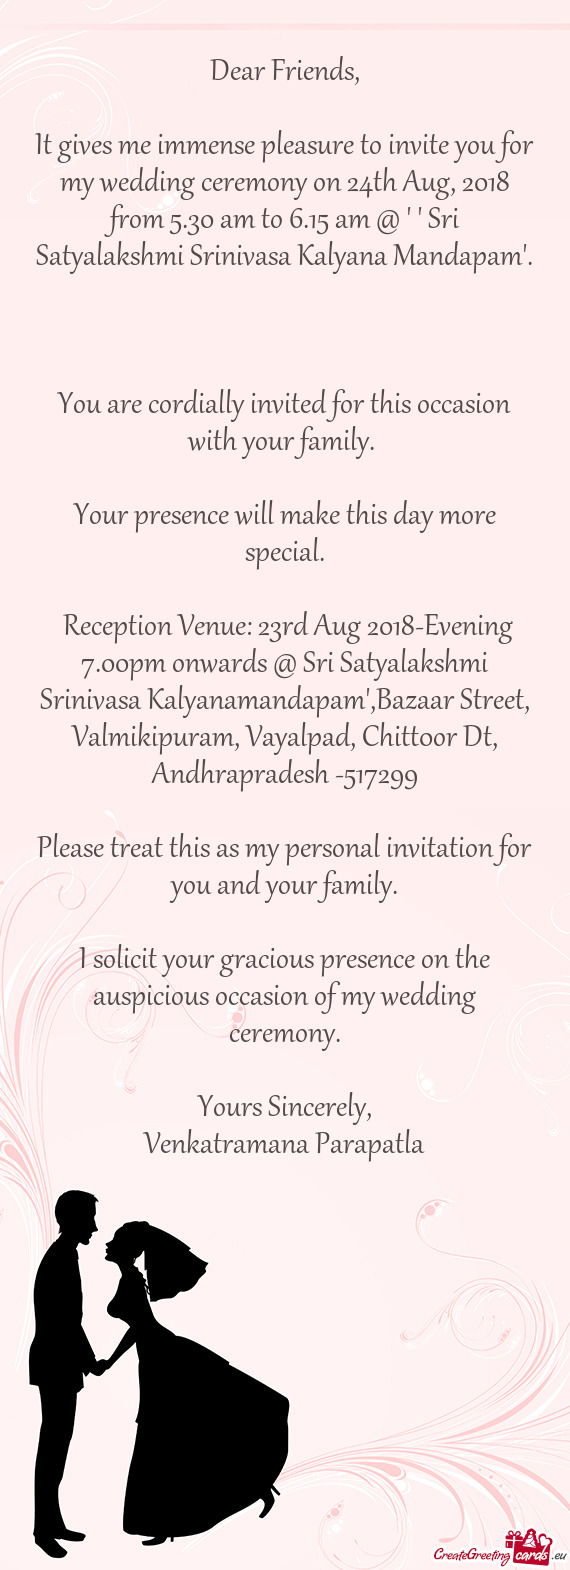 It gives me immense pleasure to invite you for my wedding ceremony on 24th Aug, 2018 from 5.30 am to